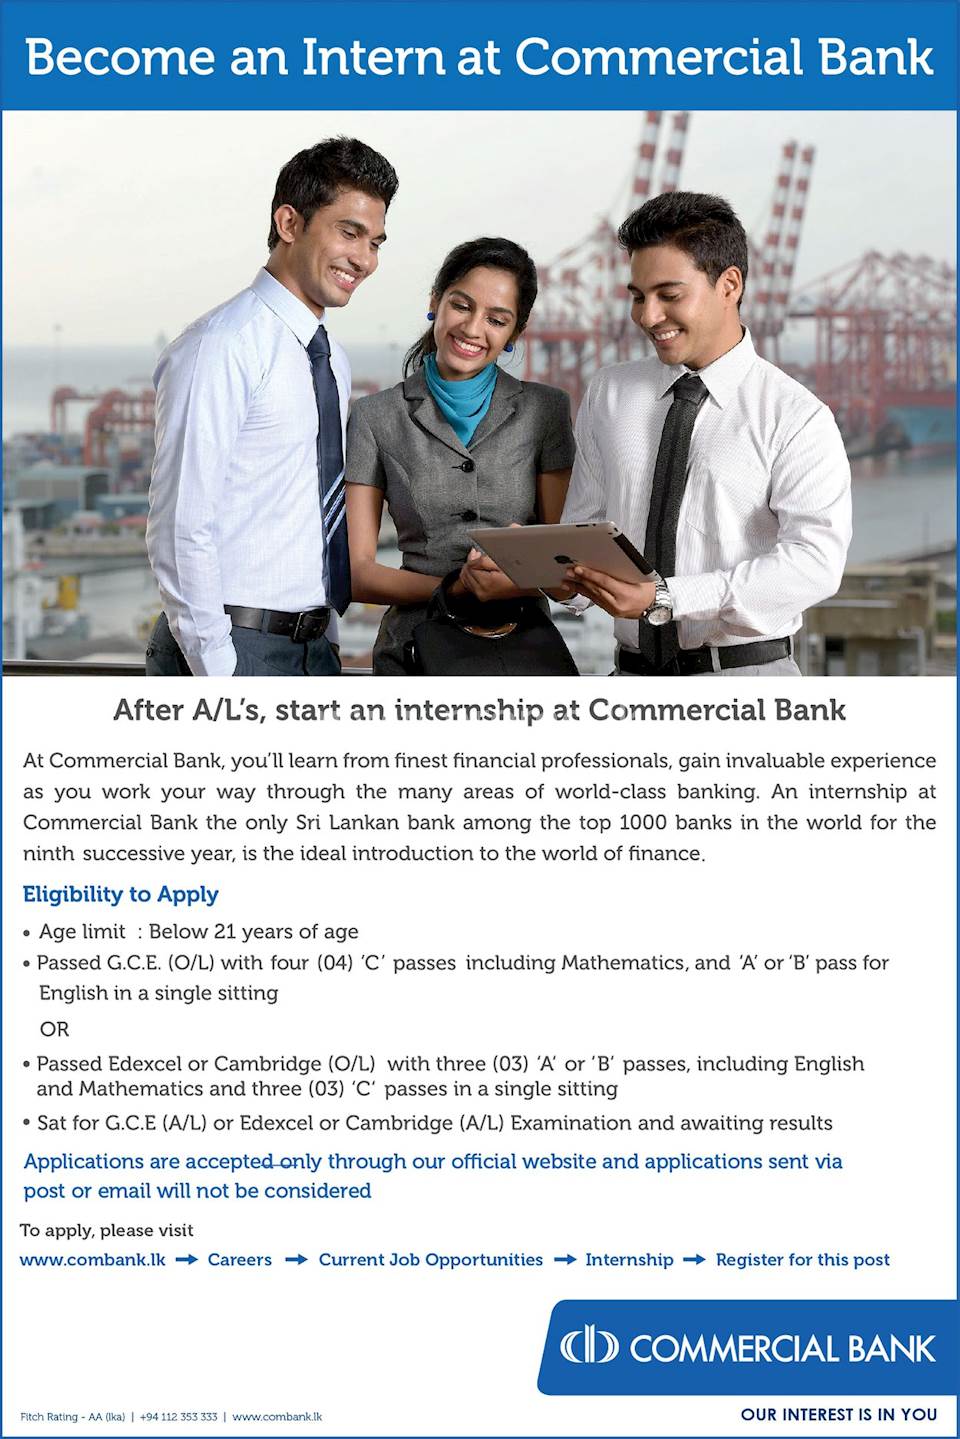 Become a Banking Intern